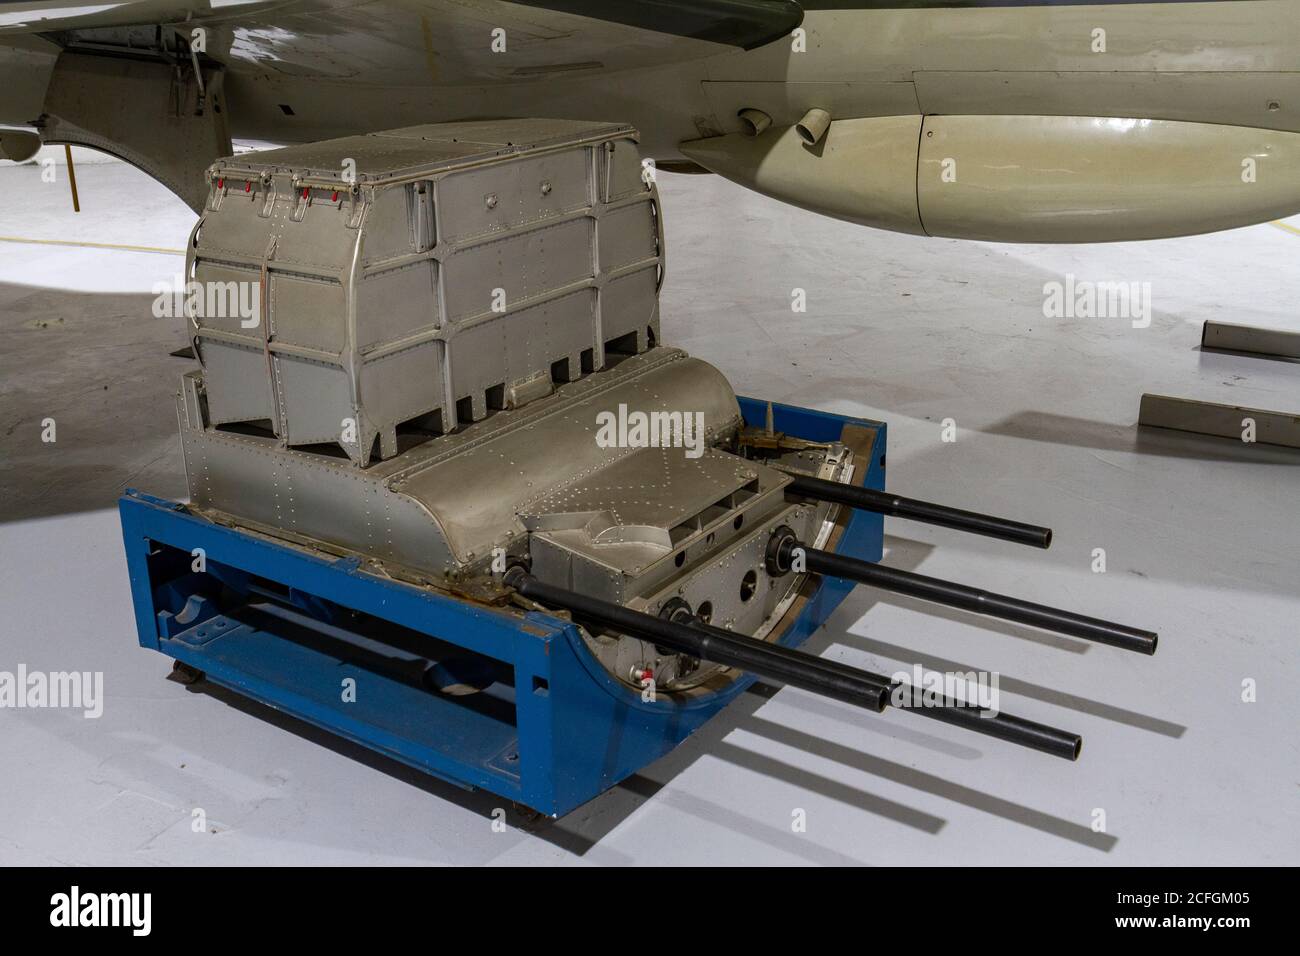 A 30mm Aden gun used on the Jaguar, Hawk and Harrier aircraft on display in the RAF Museum, London, UK. Stock Photo